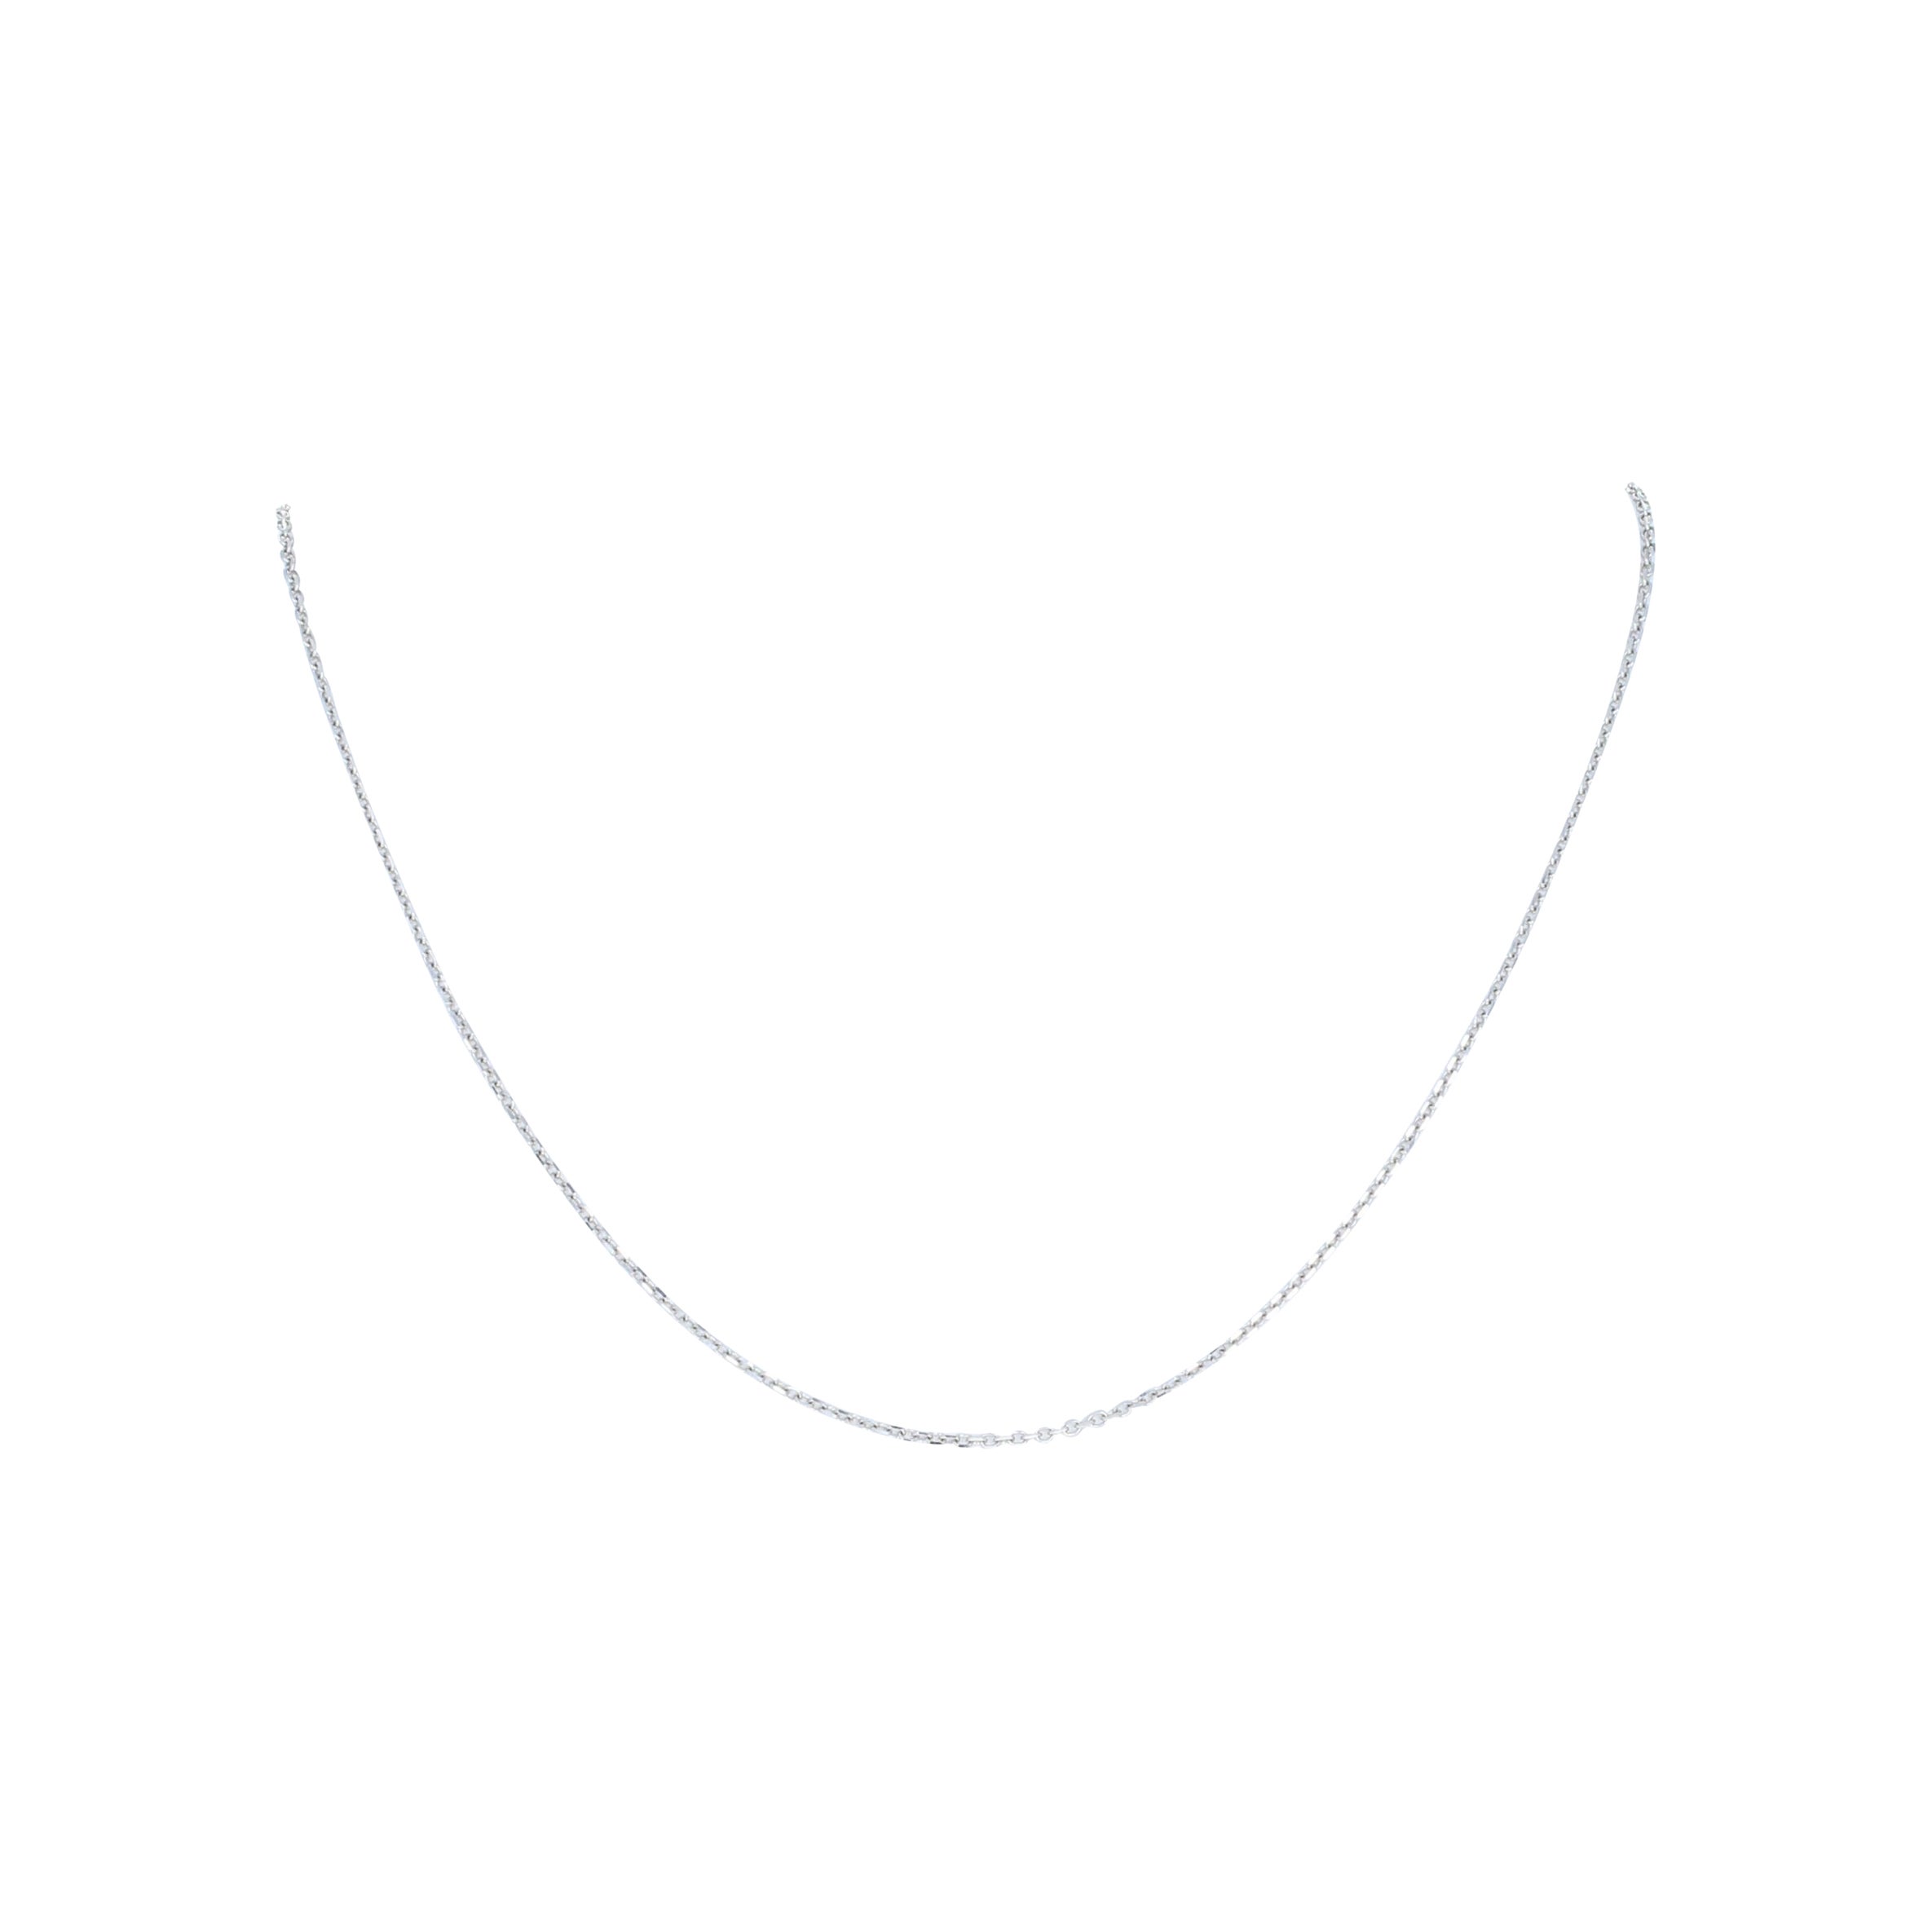 New Women's Diamond Cut Cable Chain Necklace, 14k White Gold